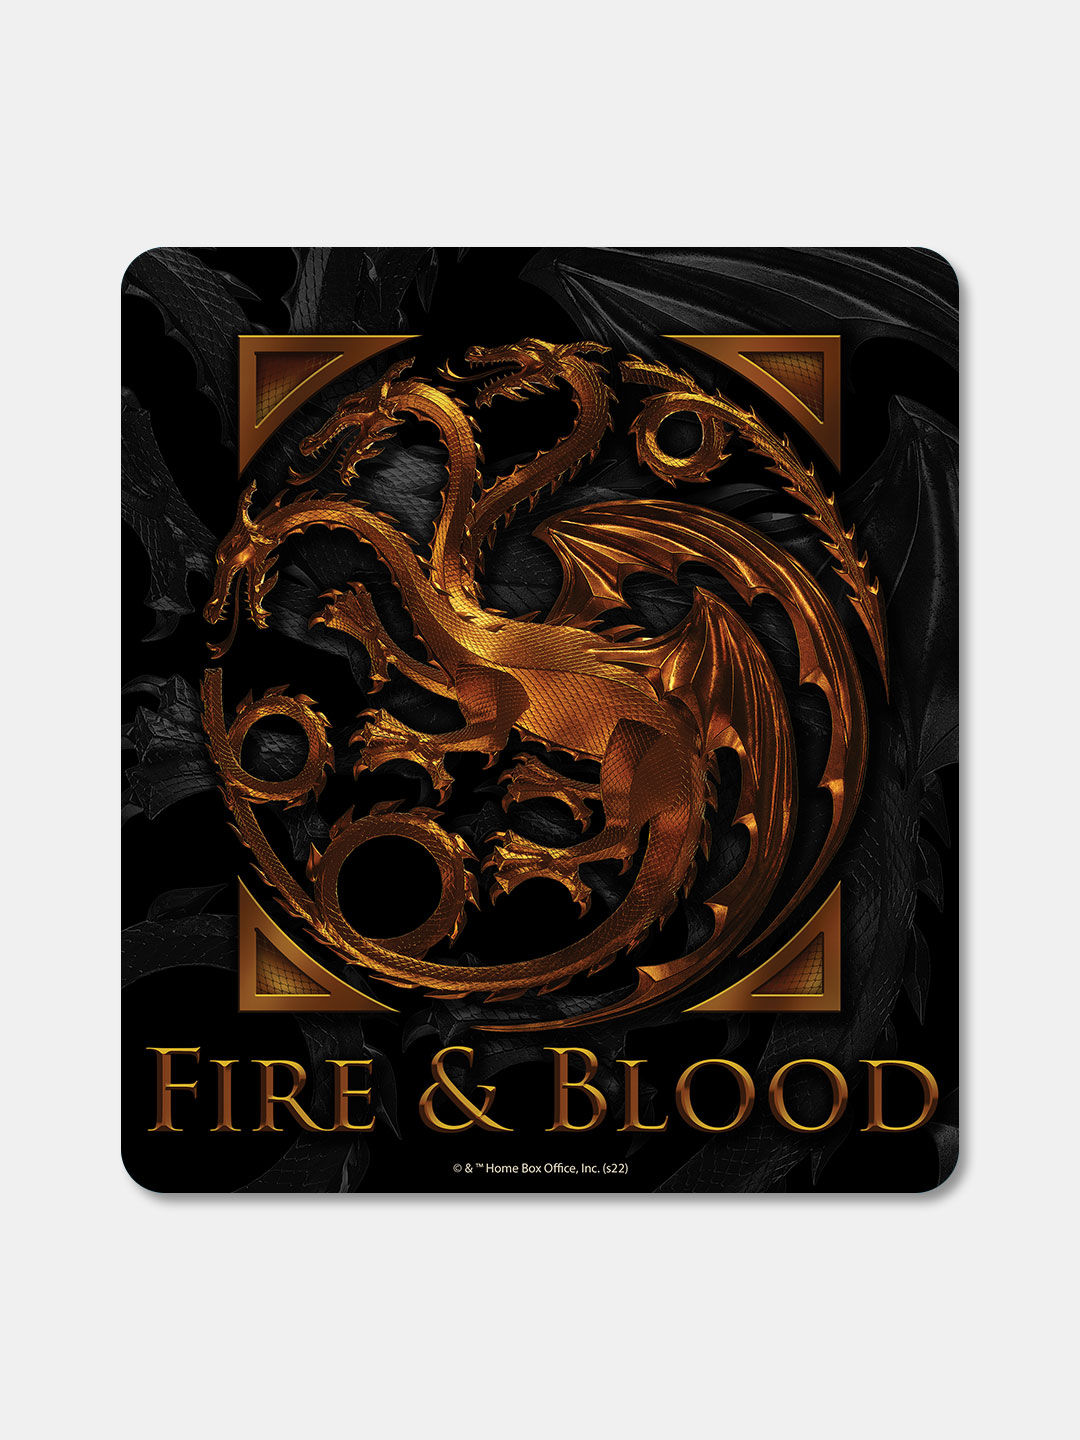 Buy HOD Fire and blood - Macmerise Mouse Pad Mouse Pads Online